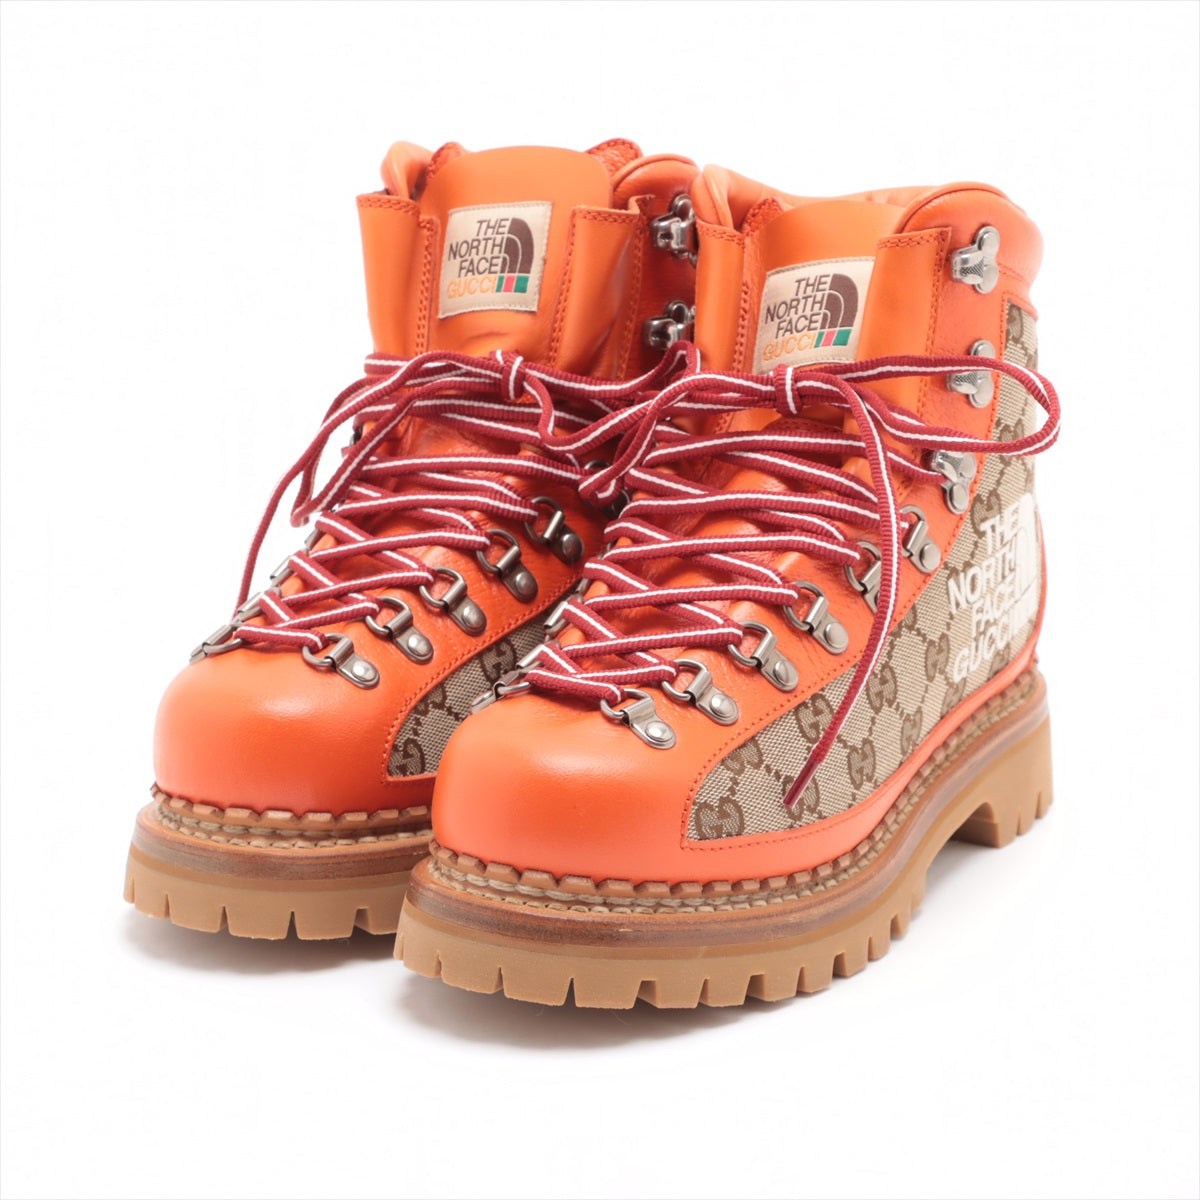 Gucci x North Face GG Canvas Canvas & Leather Boots 37 1/2 Ladies' Beige x orange 679927 Box Bag Included